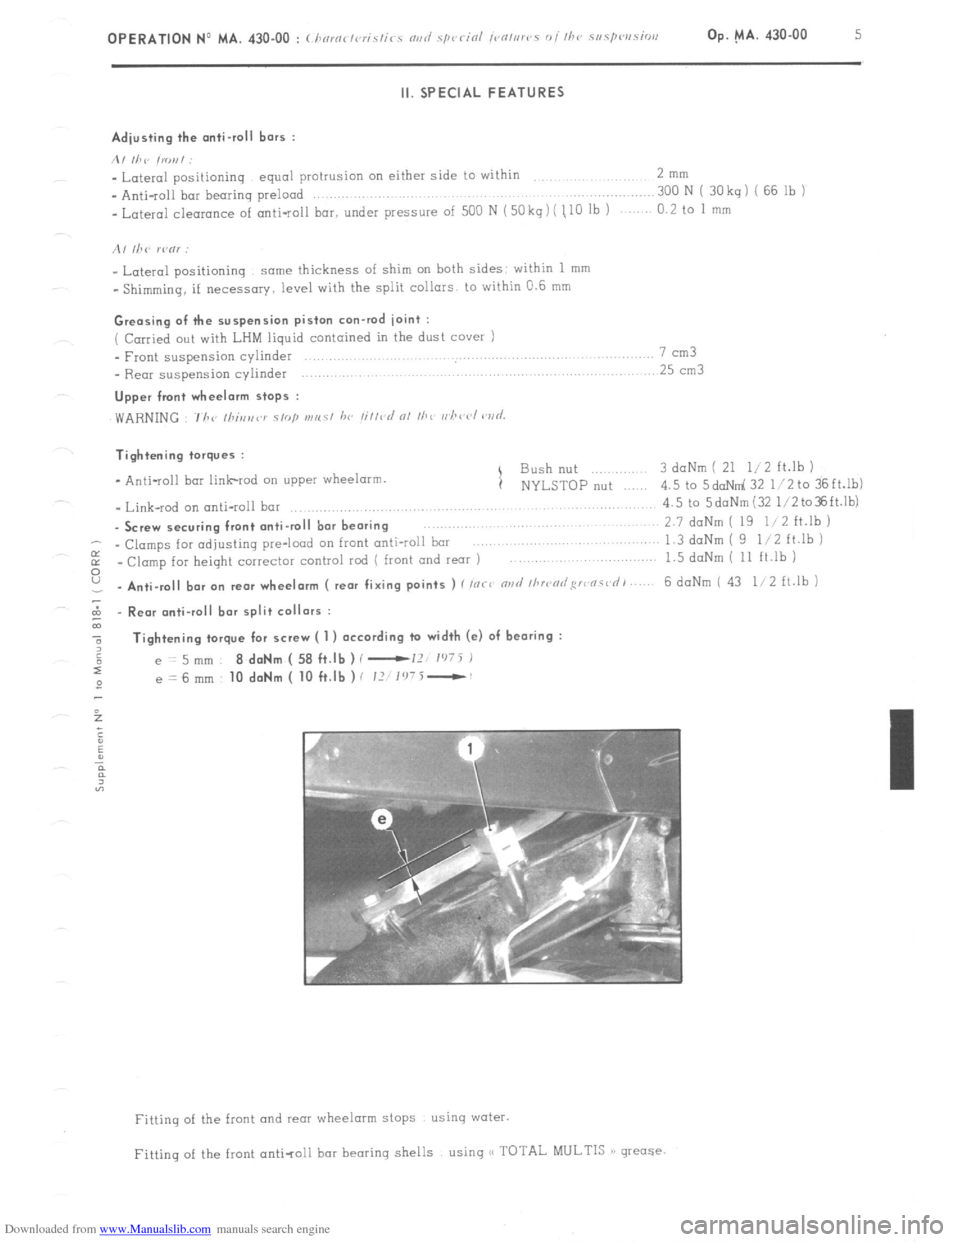 Citroen CX 1985 1.G Workshop Manual Downloaded from www.Manualslib.com manuals search engine OPERATION No MA. 430.00 : c ,,<,,a< ,<,r;s,;rs mi/ .s/wrin/ ,vn/srrs oi /he srmf~rw.~ion Op. MA. 430-00 5 
II. SPECIAL FEATURES 
Adjusting the 